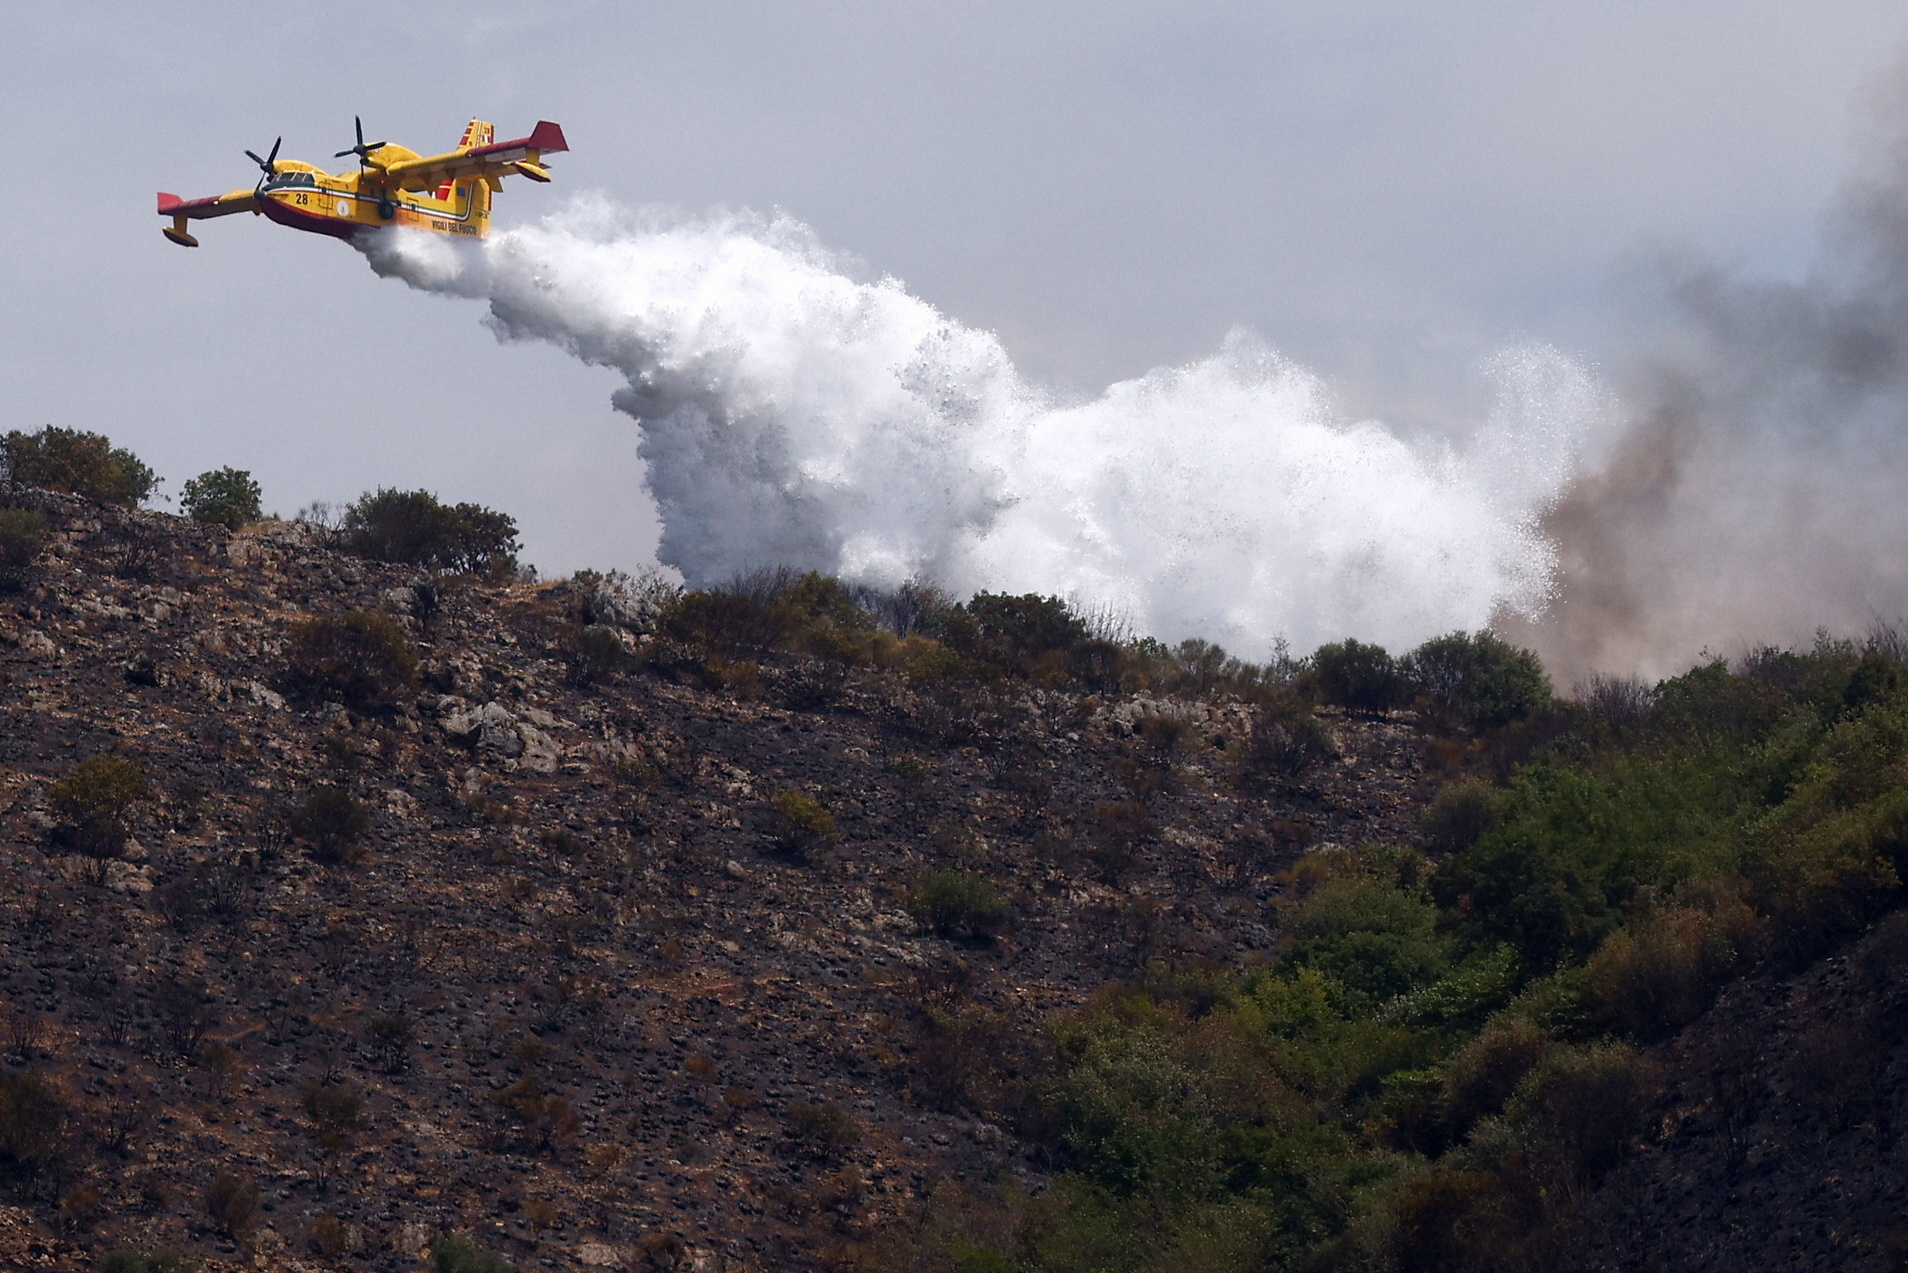 A firefighting airplane drops water as a wildfire burns in the Monte Catillo nature reserve in Tivoli, near Rome, Italy, August 13, 2021. REUTERS/Guglielmo Mangiapane